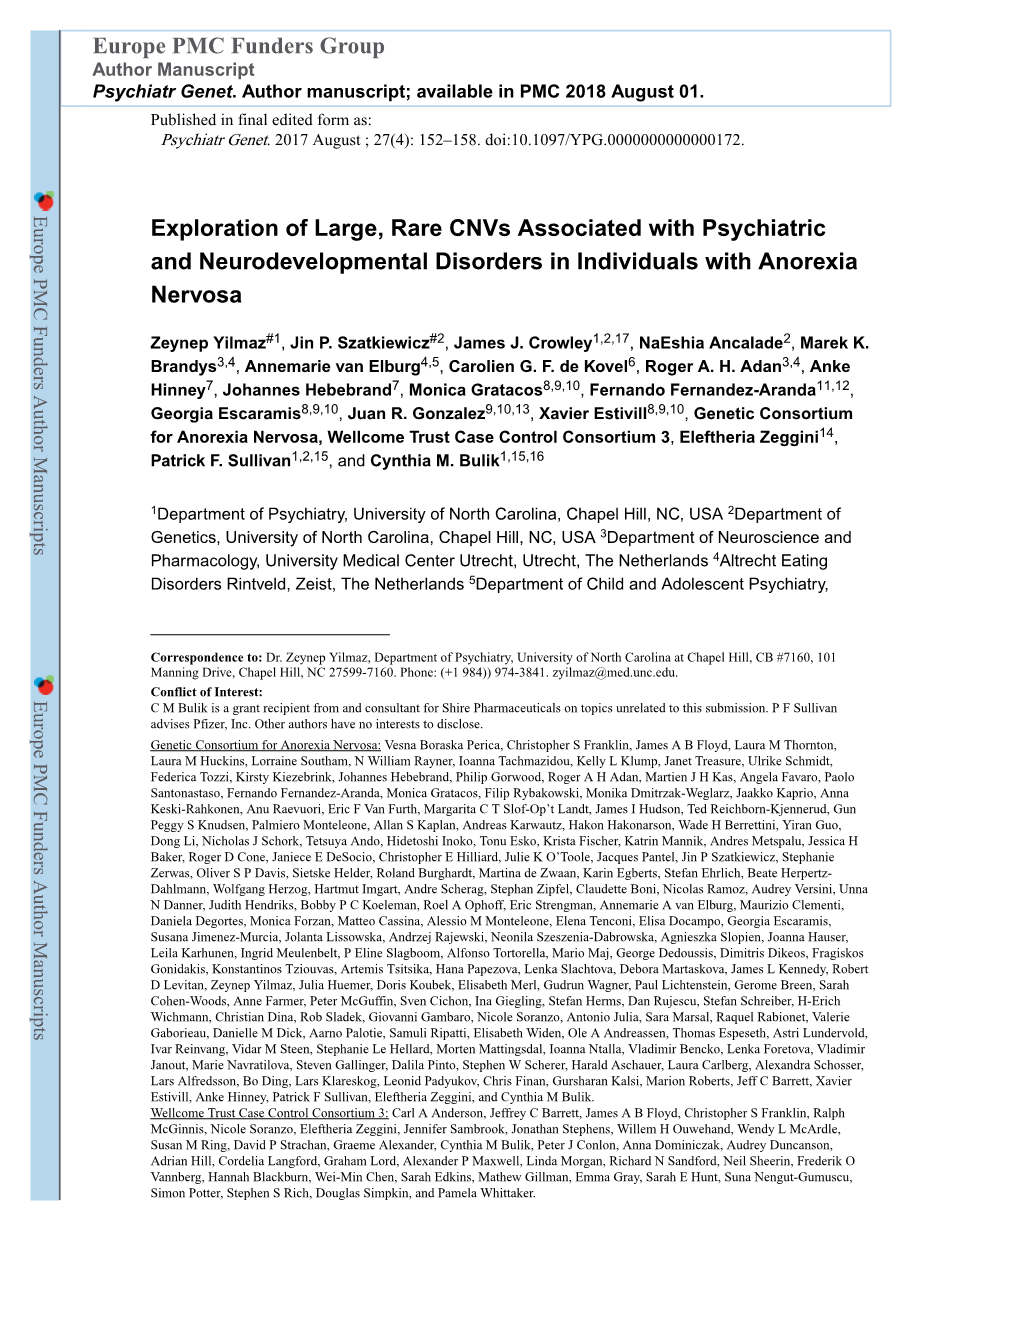 Exploration of Large, Rare Cnvs Associated with Psychiatric and Neurodevelopmental Disorders in Individuals with Anorexia Nervosa